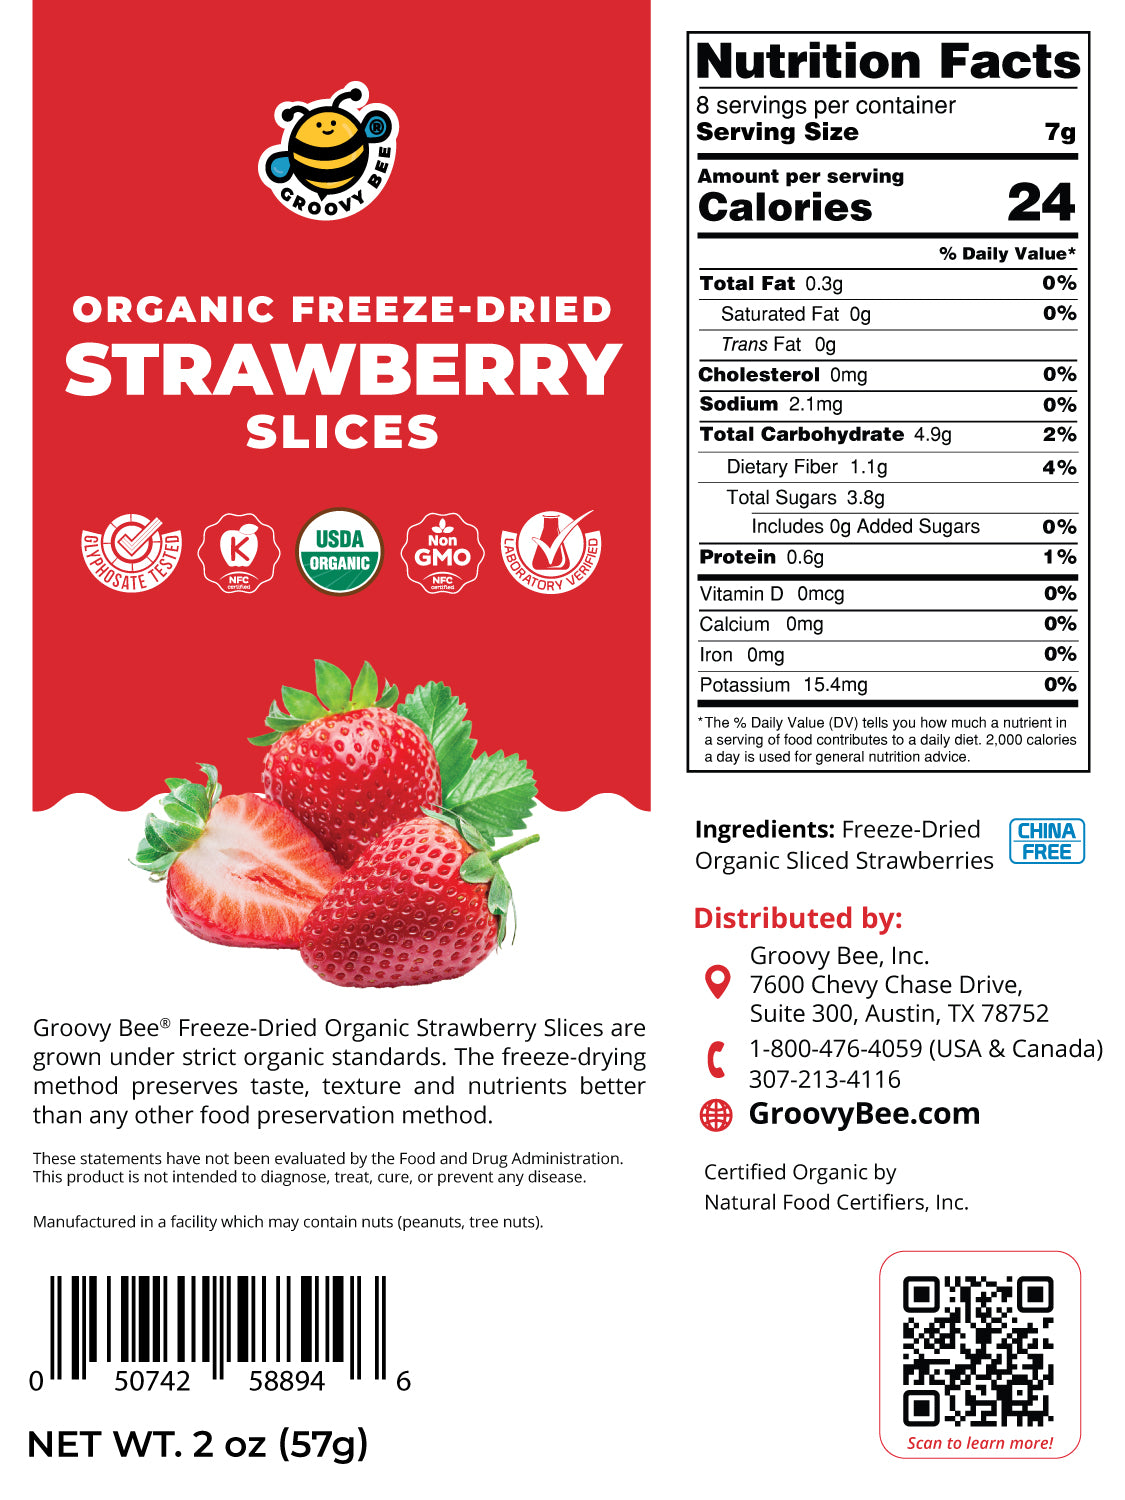 Groovy Bee® Organic Freeze-Dried Strawberry Slices 2 oz (57 g) (6-Pack)